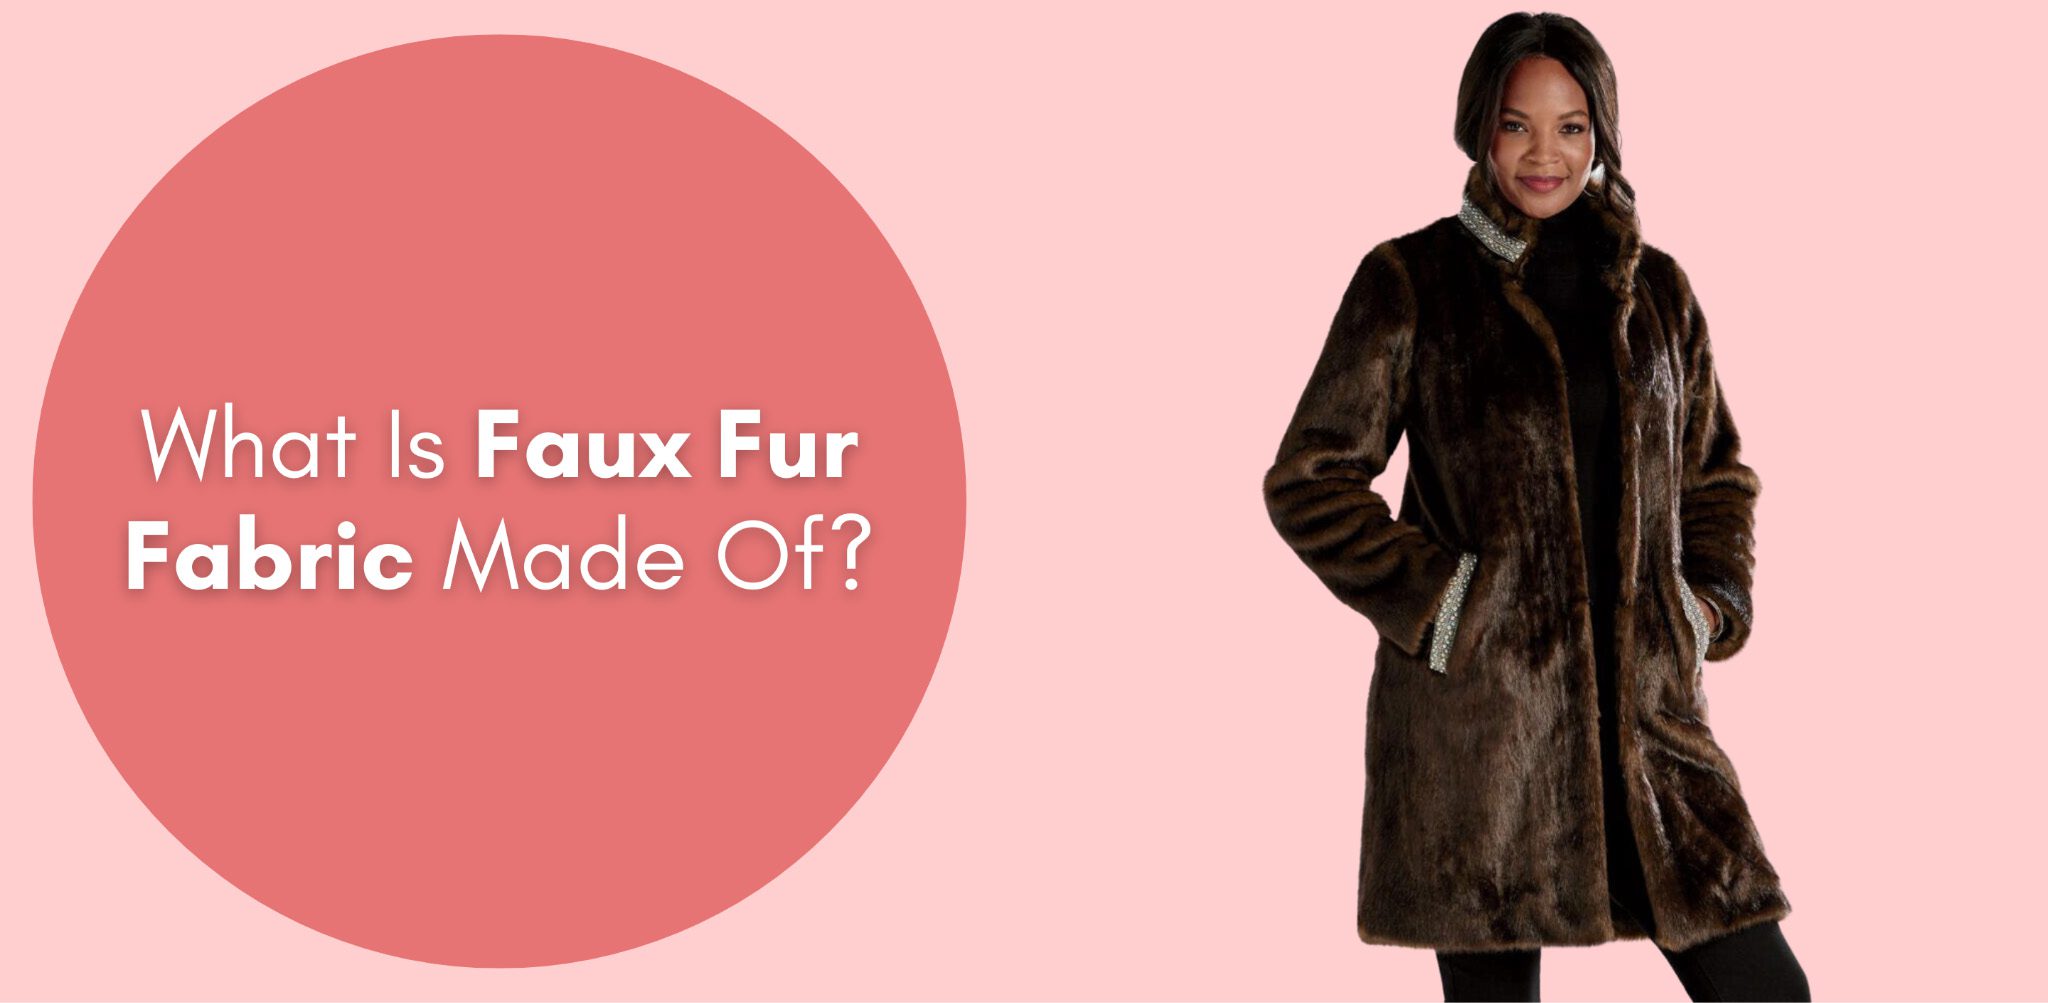 what is faux fur made of